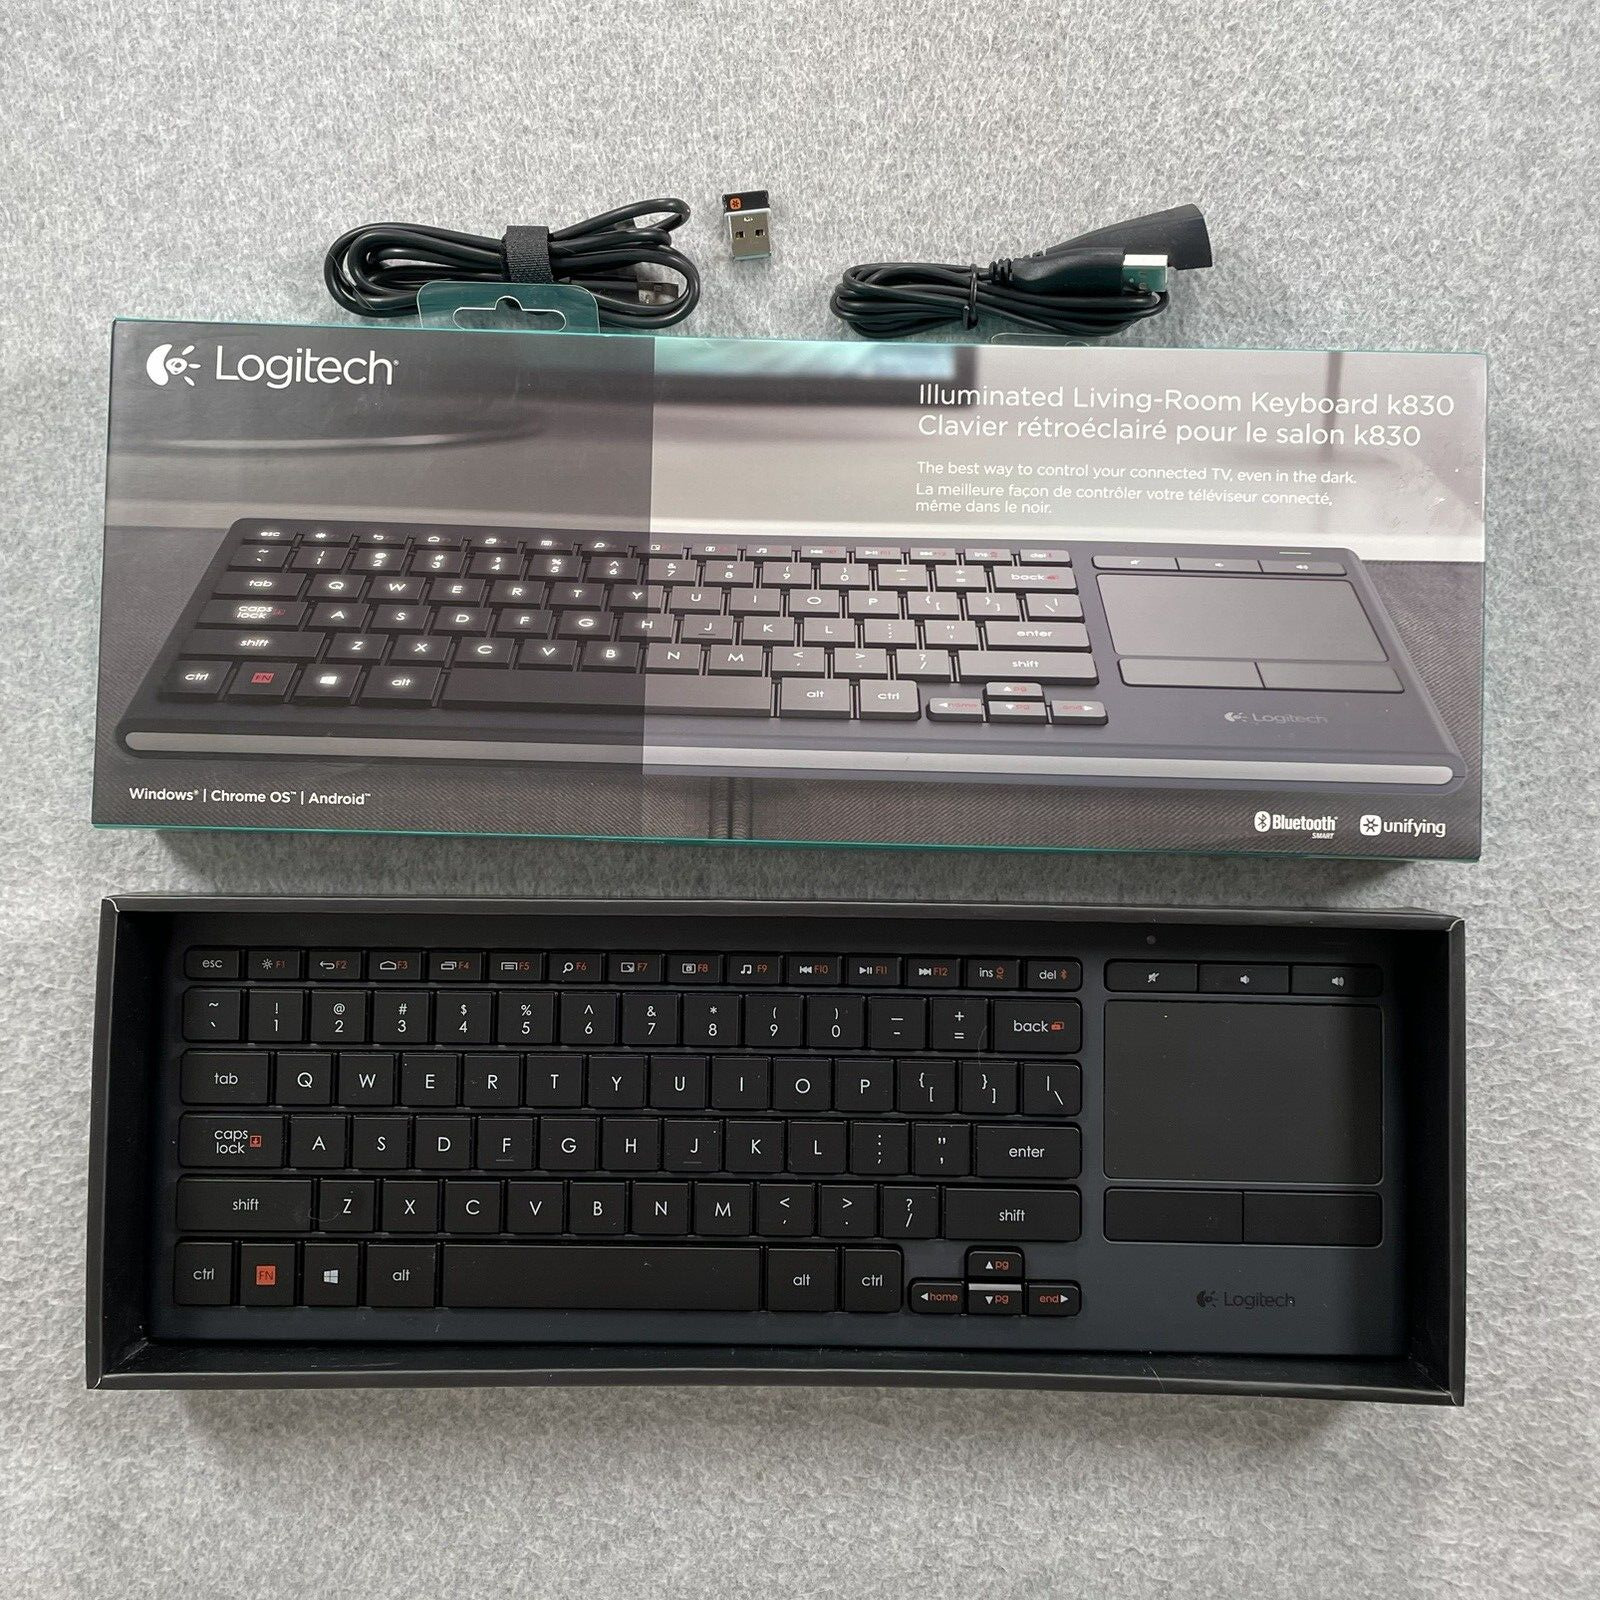 Logitech K830 Illuminated Living Room Keyboard w Built in Touchpad Tested Works